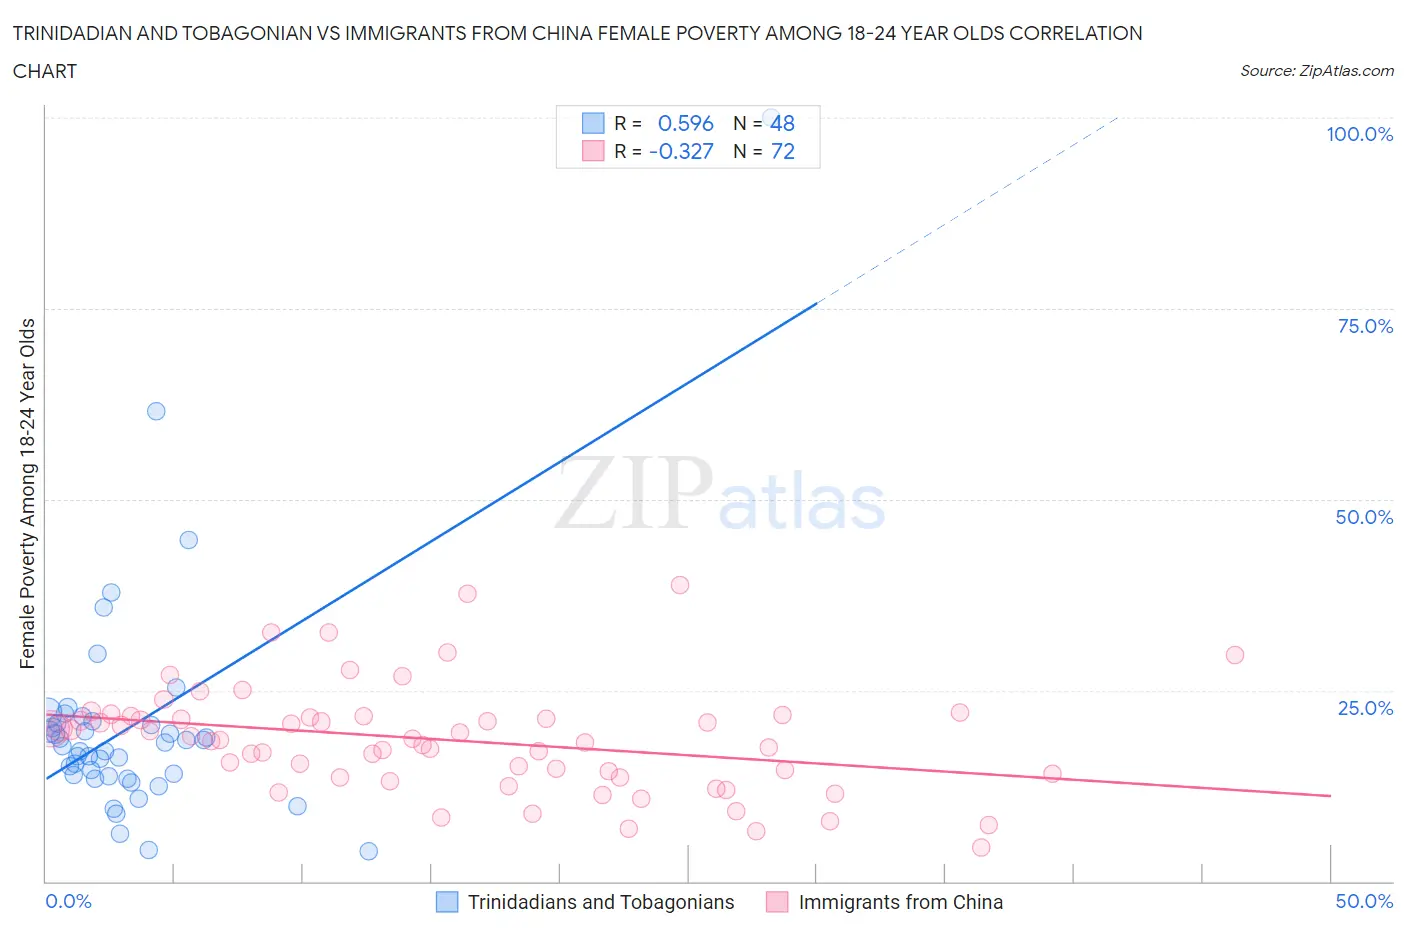 Trinidadian and Tobagonian vs Immigrants from China Female Poverty Among 18-24 Year Olds